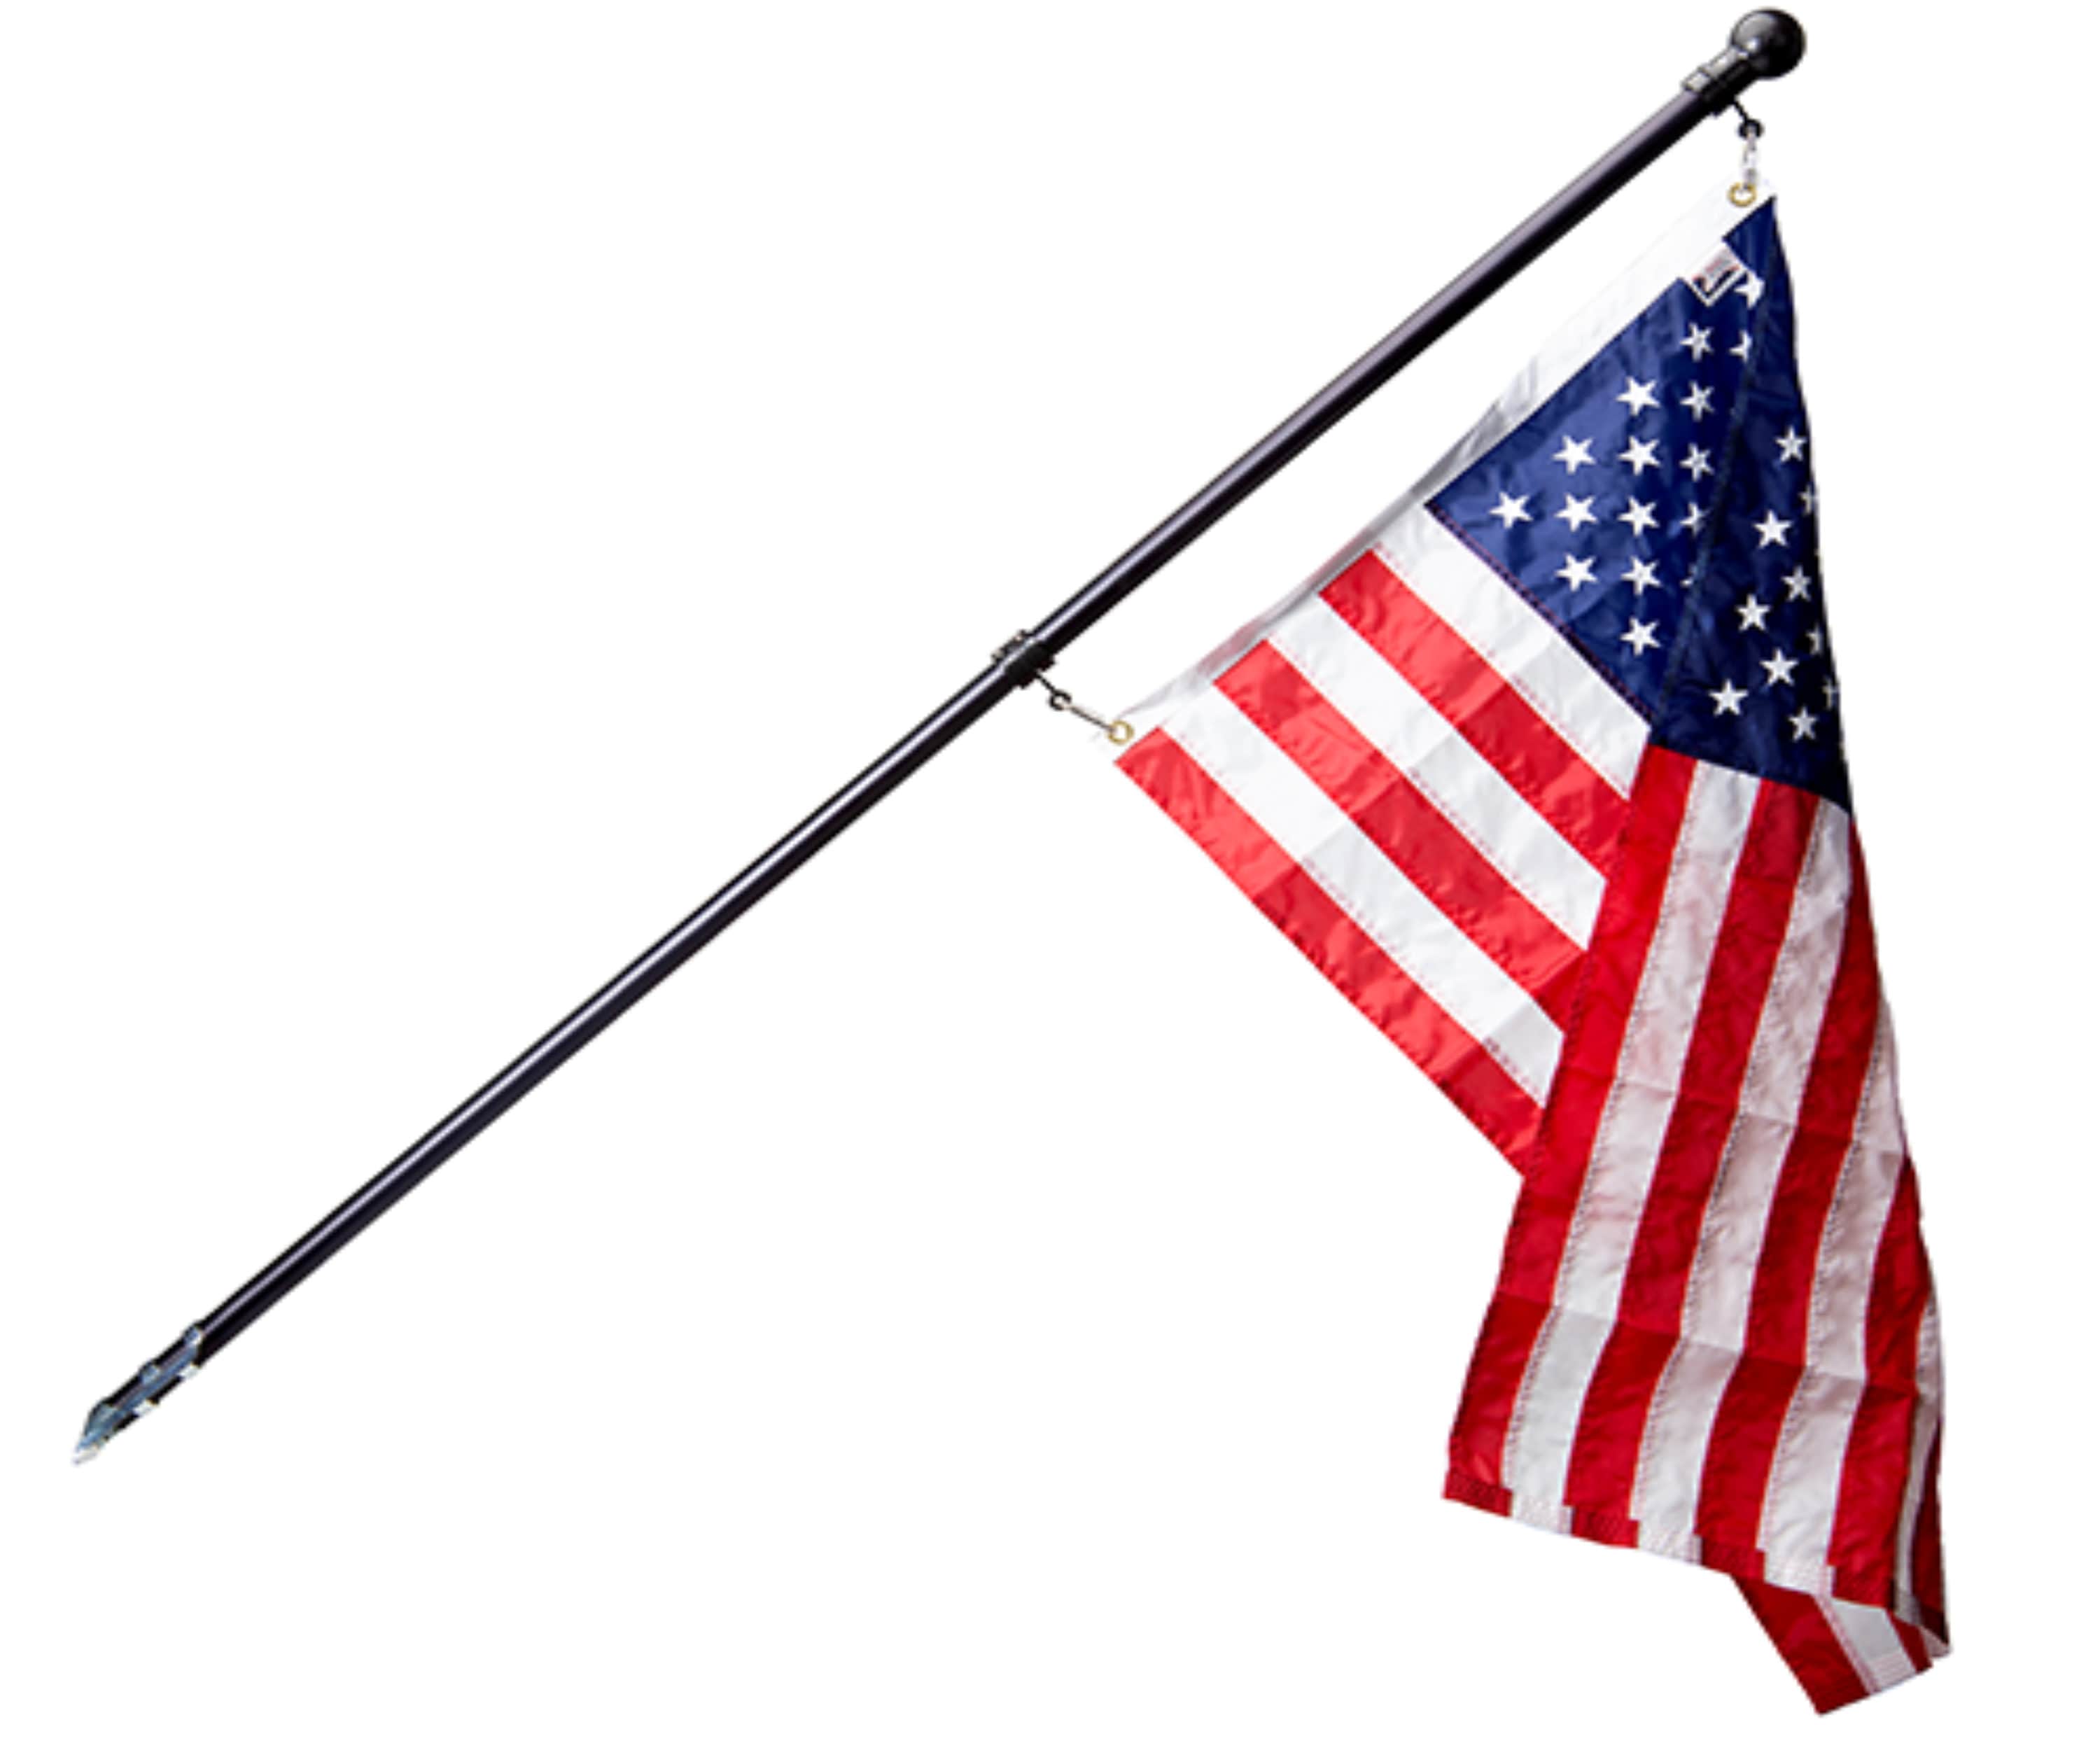 5' FT WOODEN FLAG POLE KIT WITH BRACKET & 3X5 USA AMERICAN FLAG 